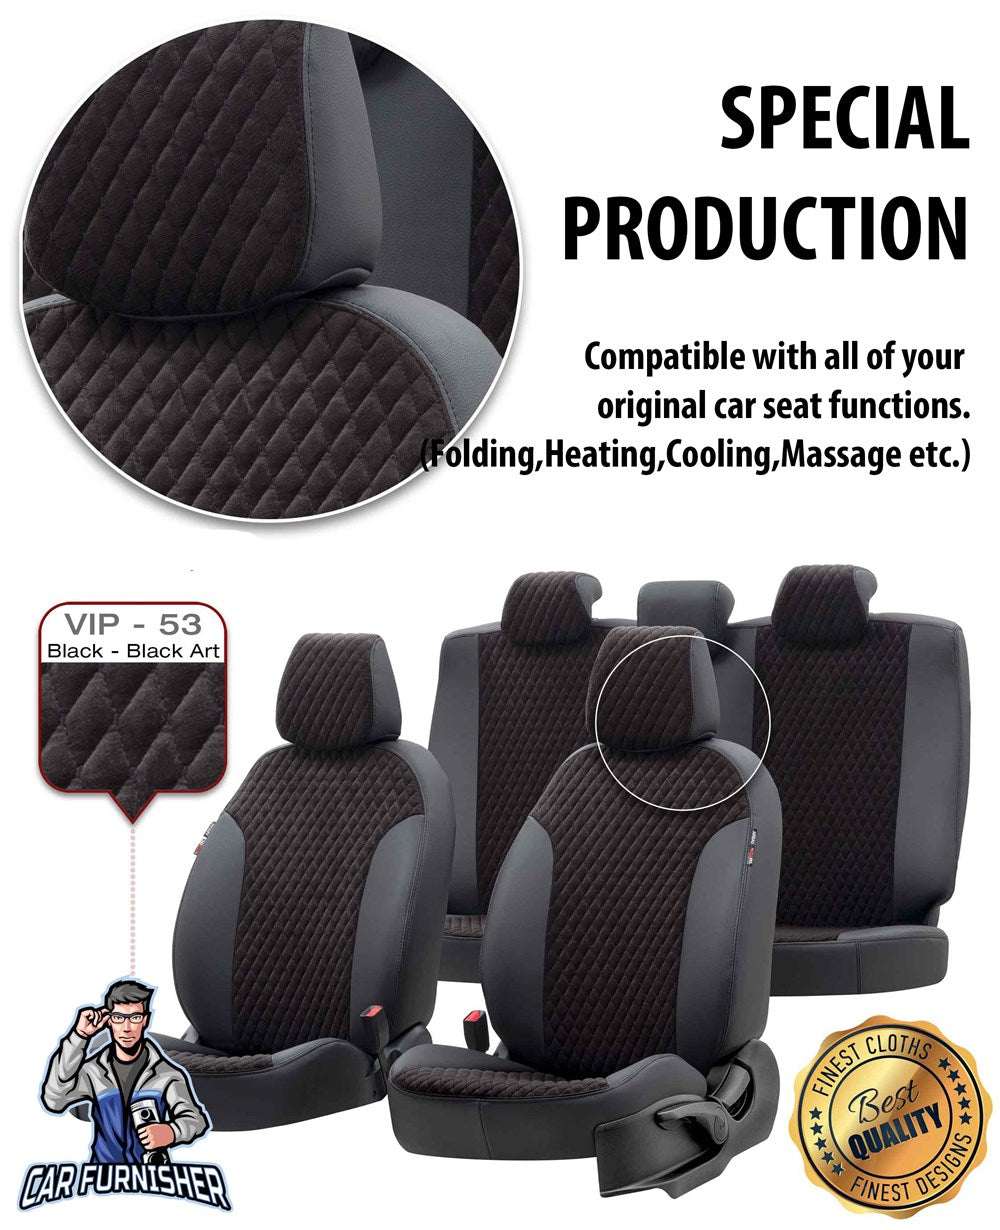 Citroen C5 Car Seat Covers 2001-2017 MK1-2-3 Amsterdam Feather Dark Gray Full Set (5 Seats + Handrest) Leather & Foal Feather